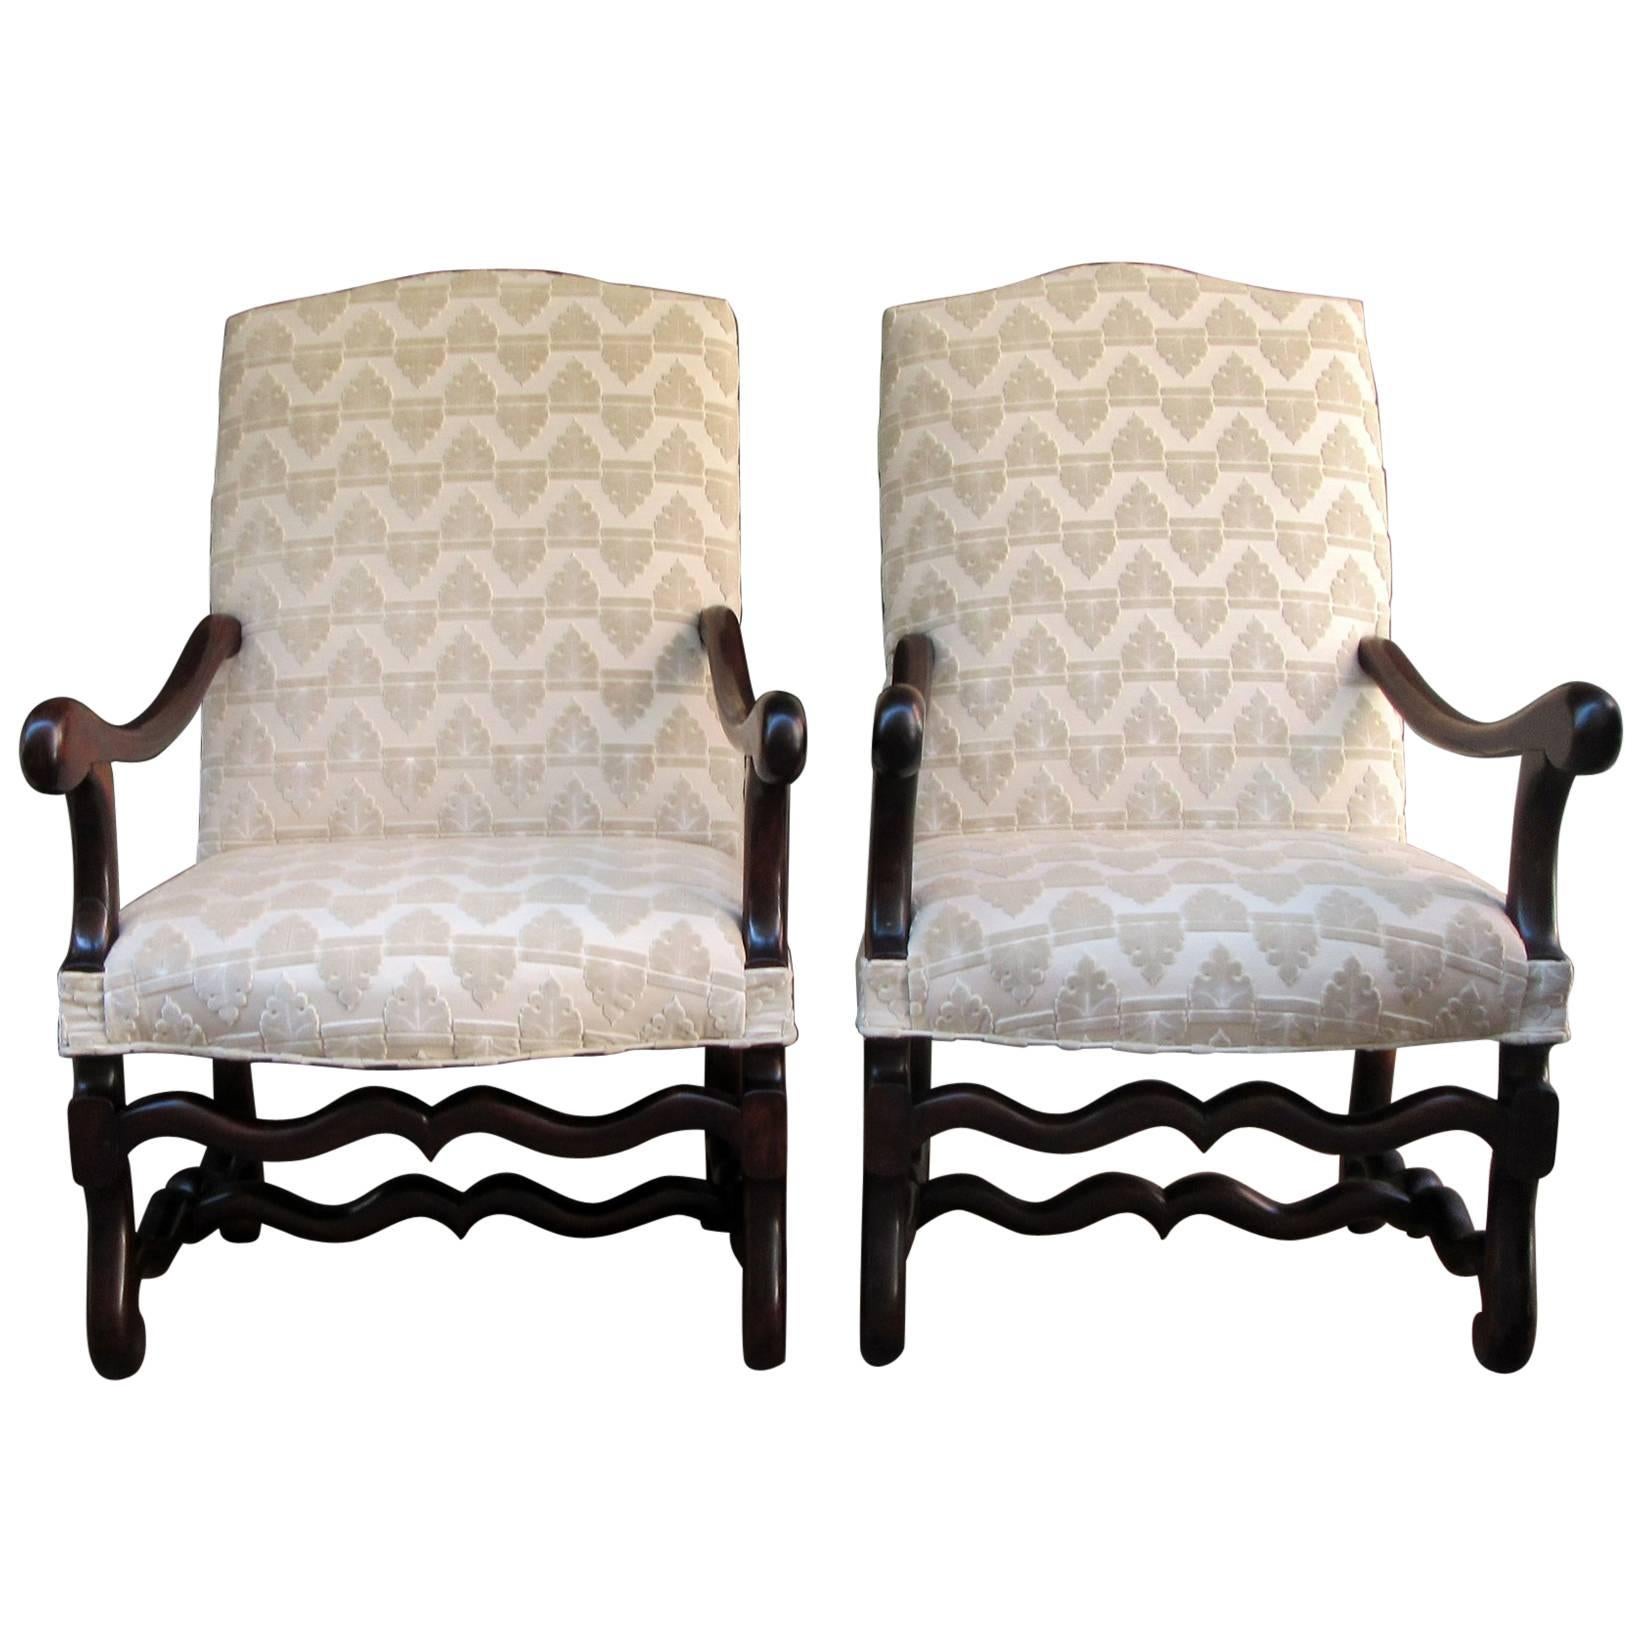 Pair of Early 19th Century French Os De Mouton Walnut Upholstered Armchairs